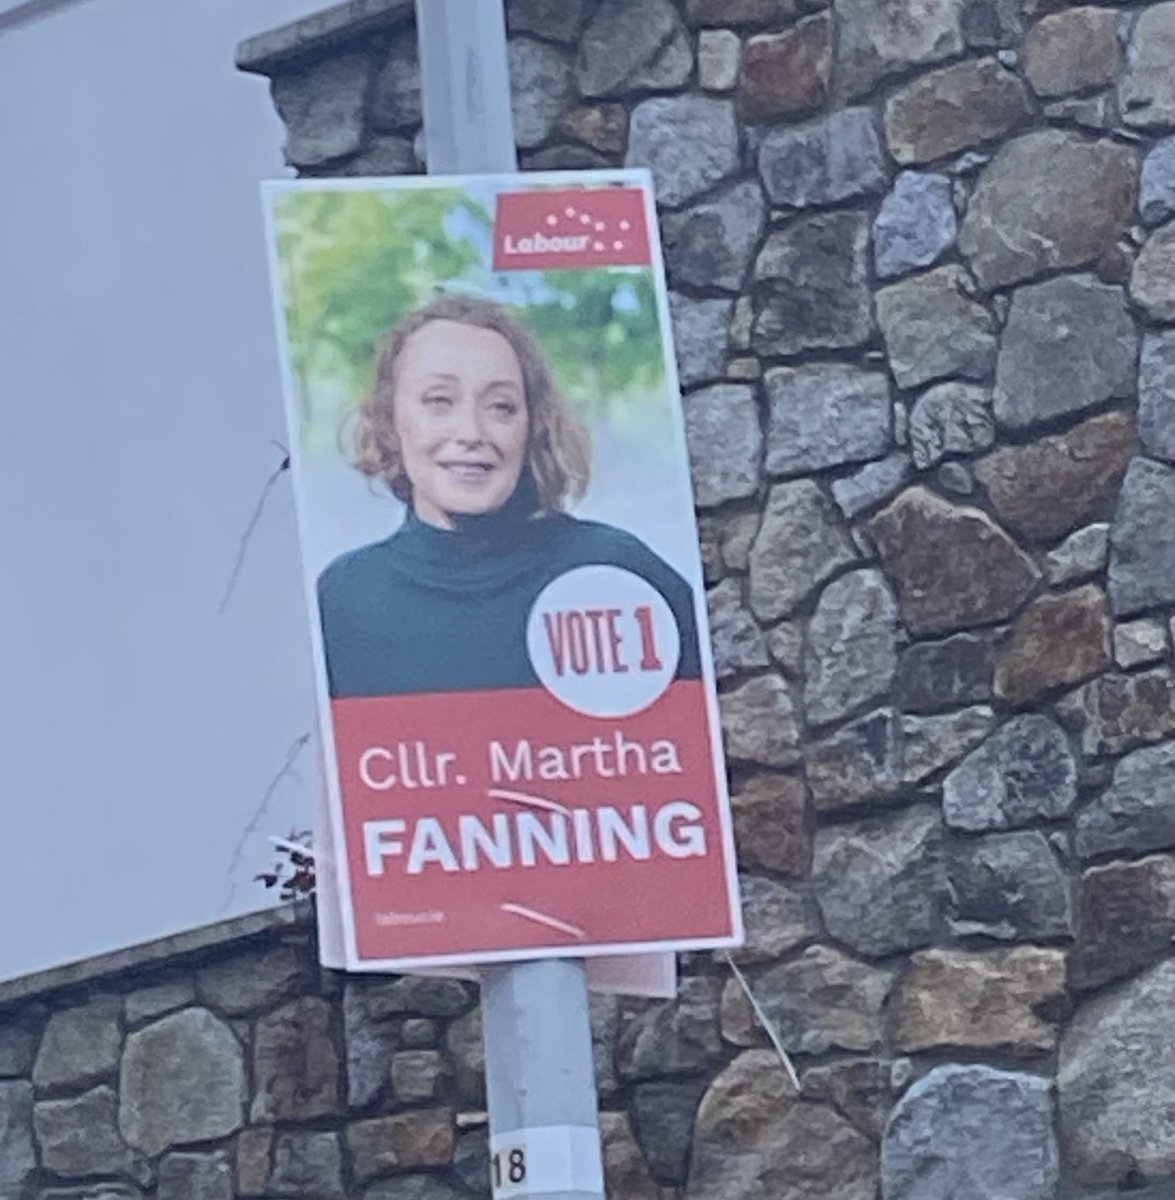 Driving home tonight with my 👦🏻🚙 Thinking in the age of social media do these election posters work at all 🤔 Then my 👦🏻 piped up that lady called to house the other day 🏠😂 ⁦@marthafanning⁩ 🙌